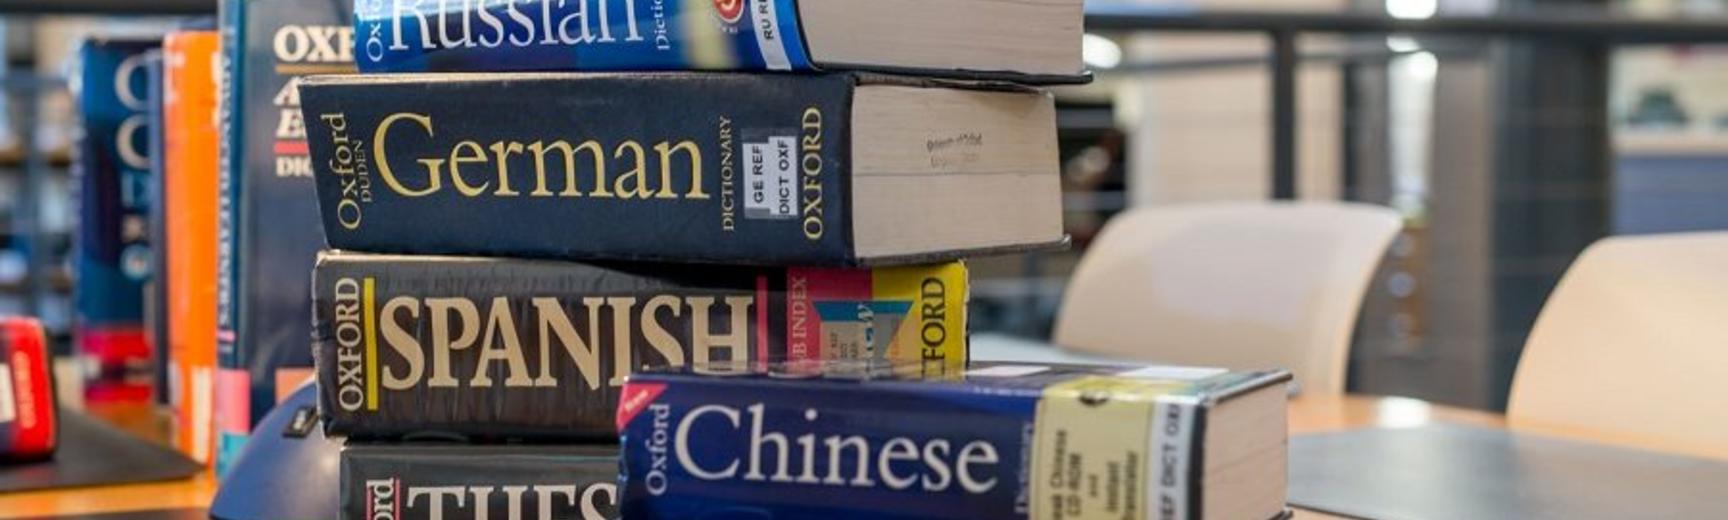 Pile of language dictionaries on a table